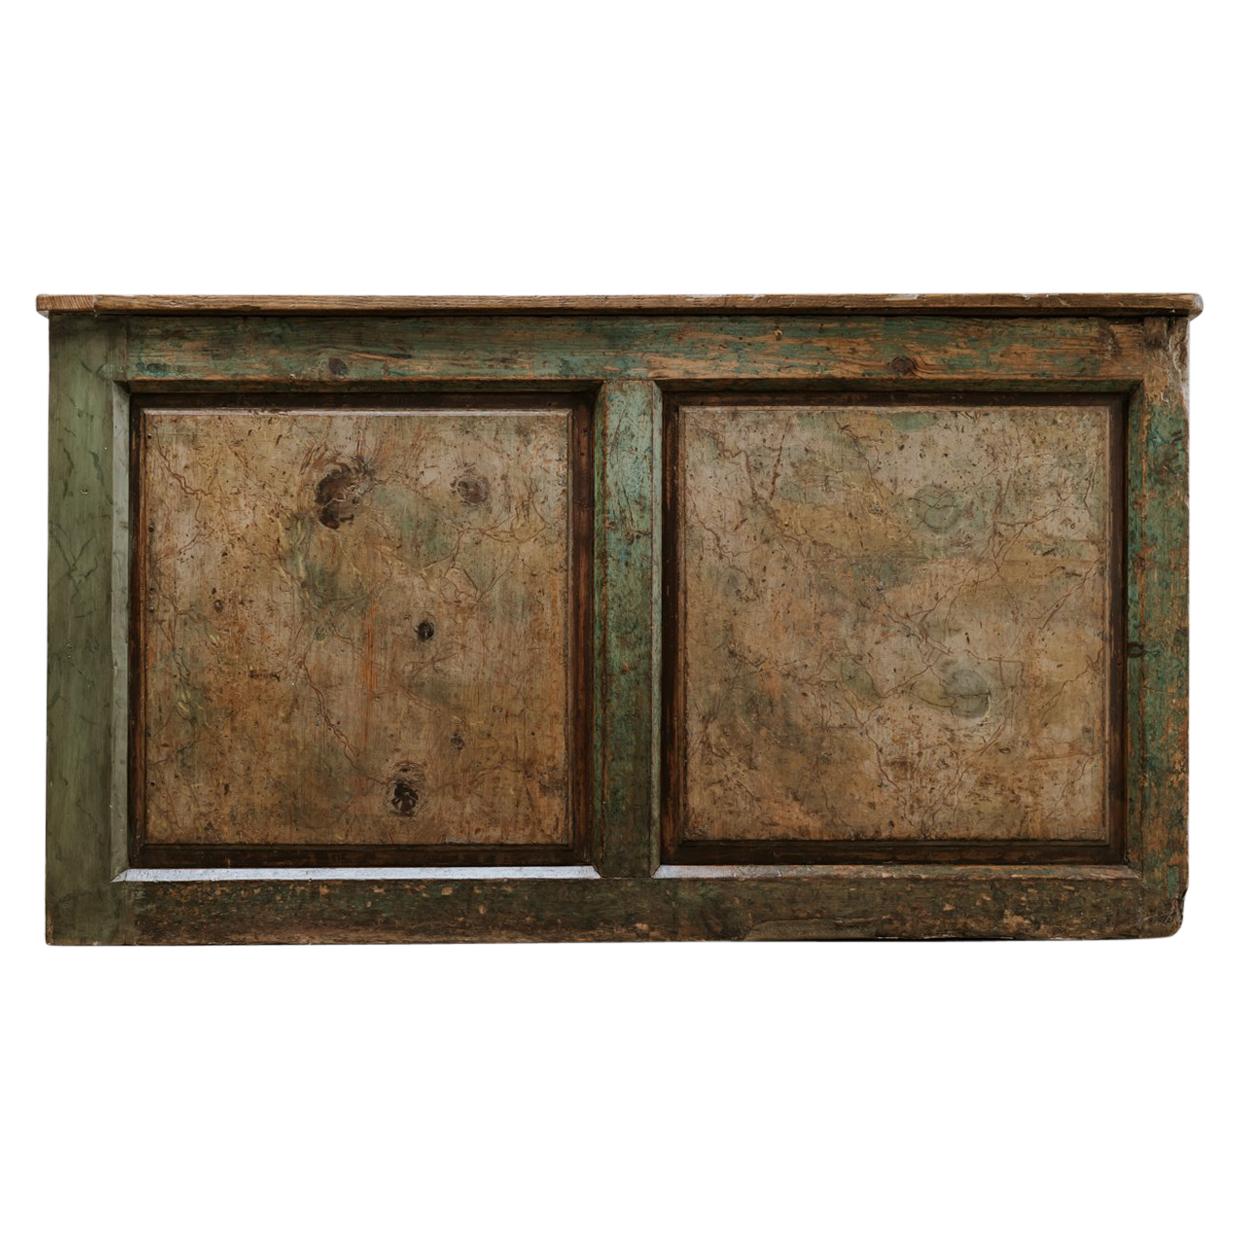 19th Century "Faux Marbre" Painted Shopcounter